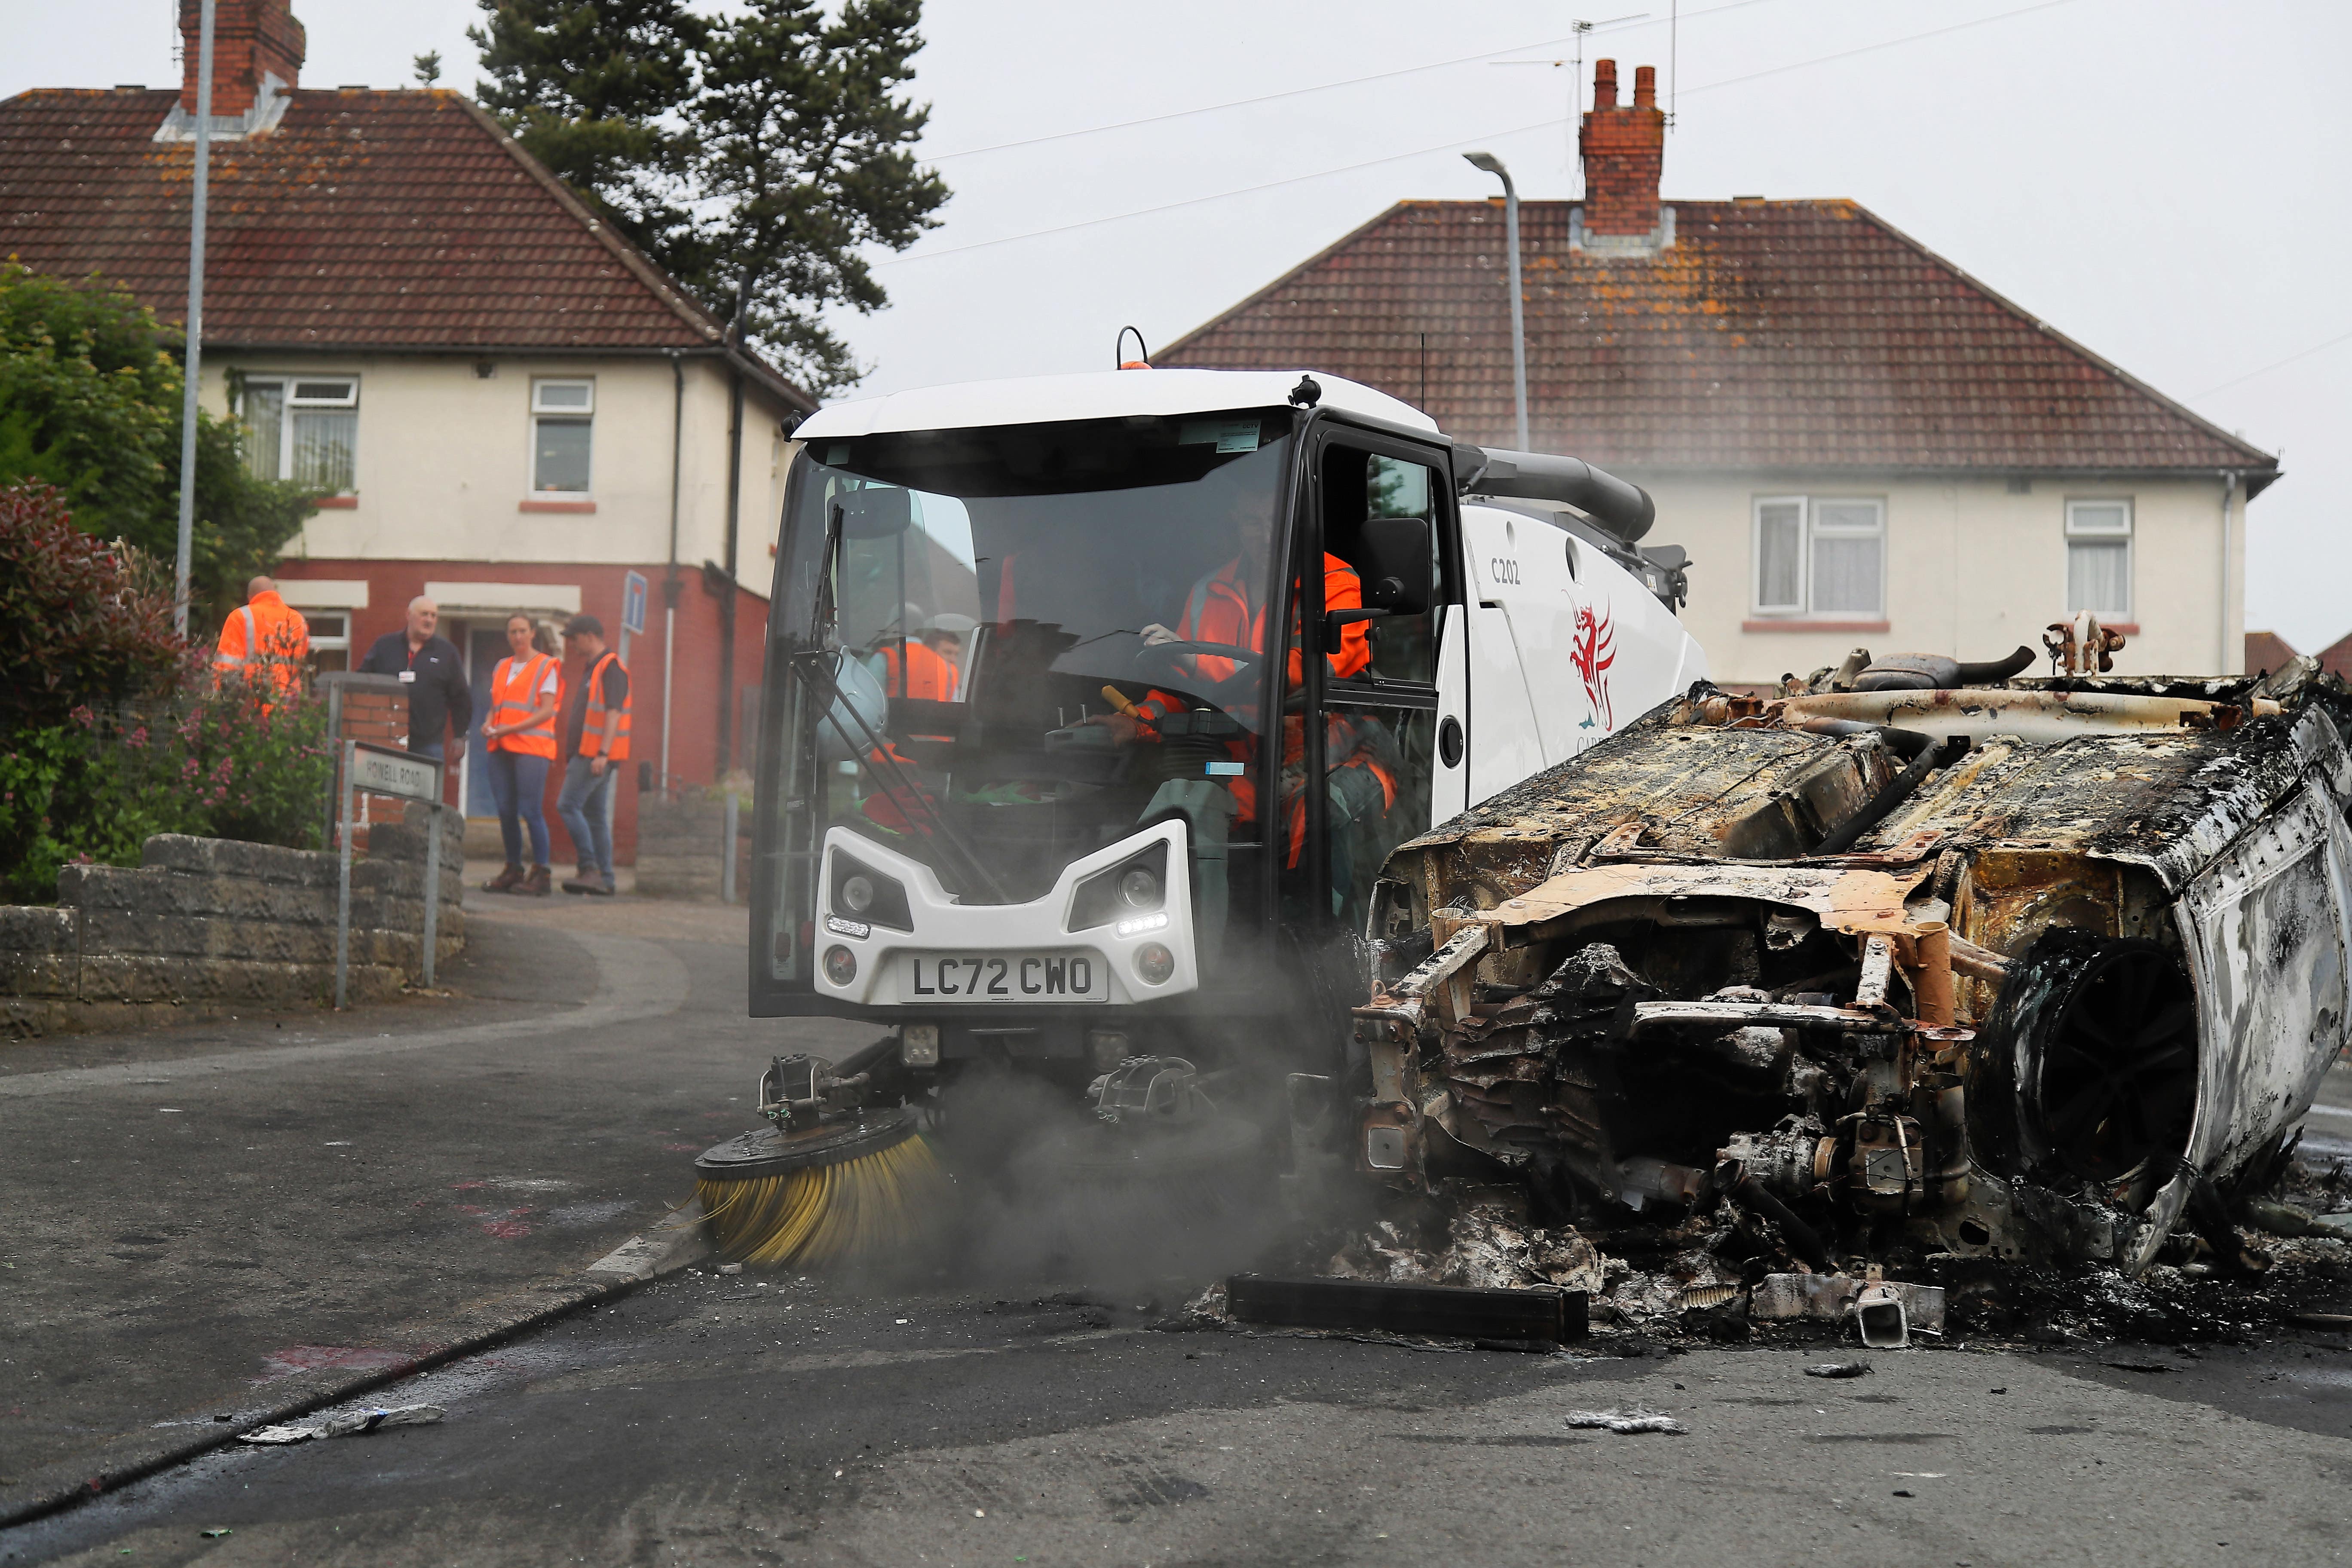 Council workers clear debris from the area immediately around a car that was set alight in Ely, Cardiff, following the riot that broke out after two teenagers died in a crash (PA)